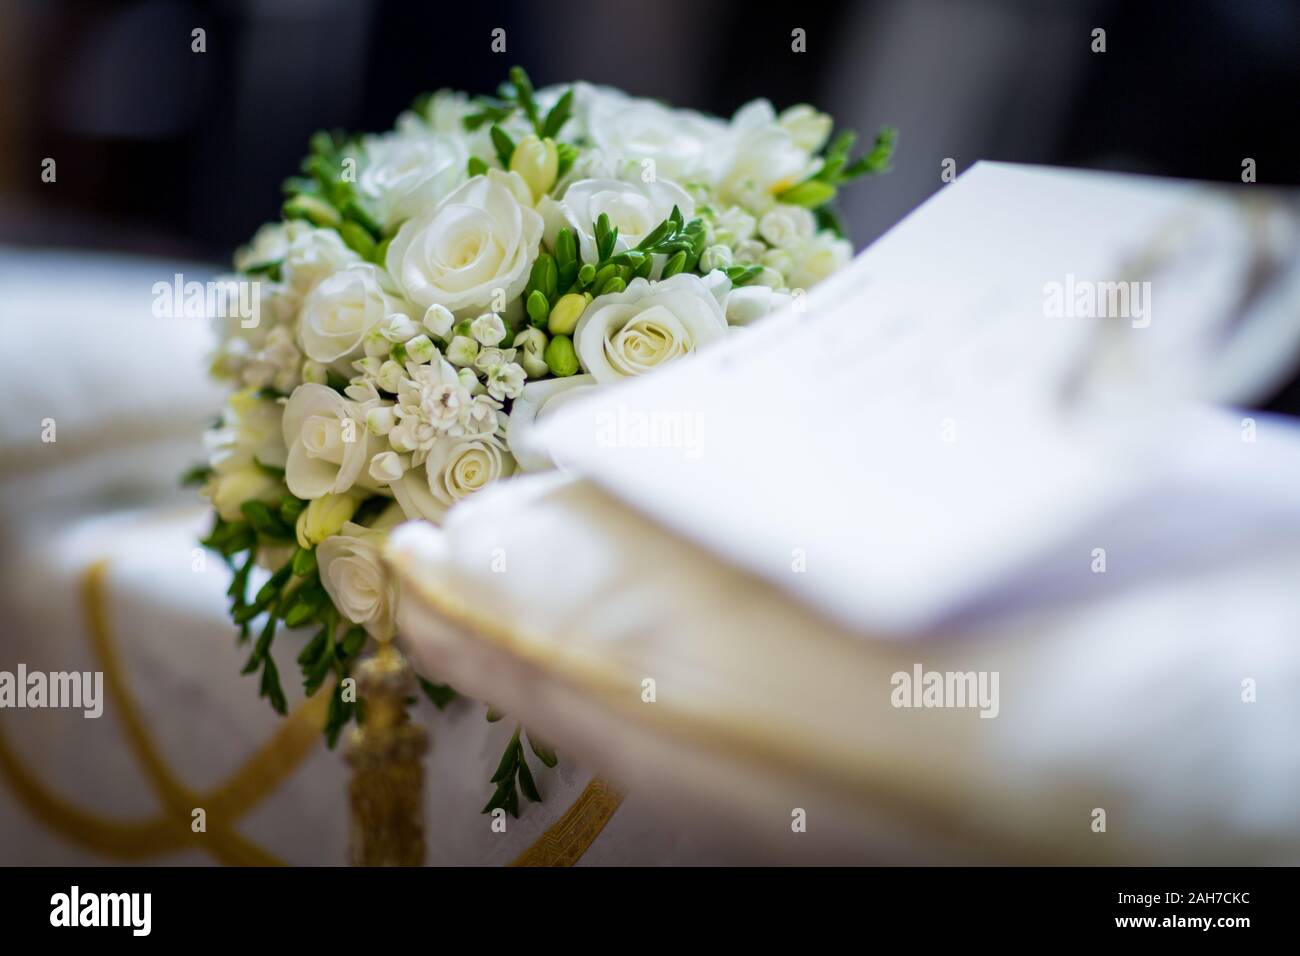 Close up of a bouquet of white roses lying on a church pew adorned for a wedding Stock Photo